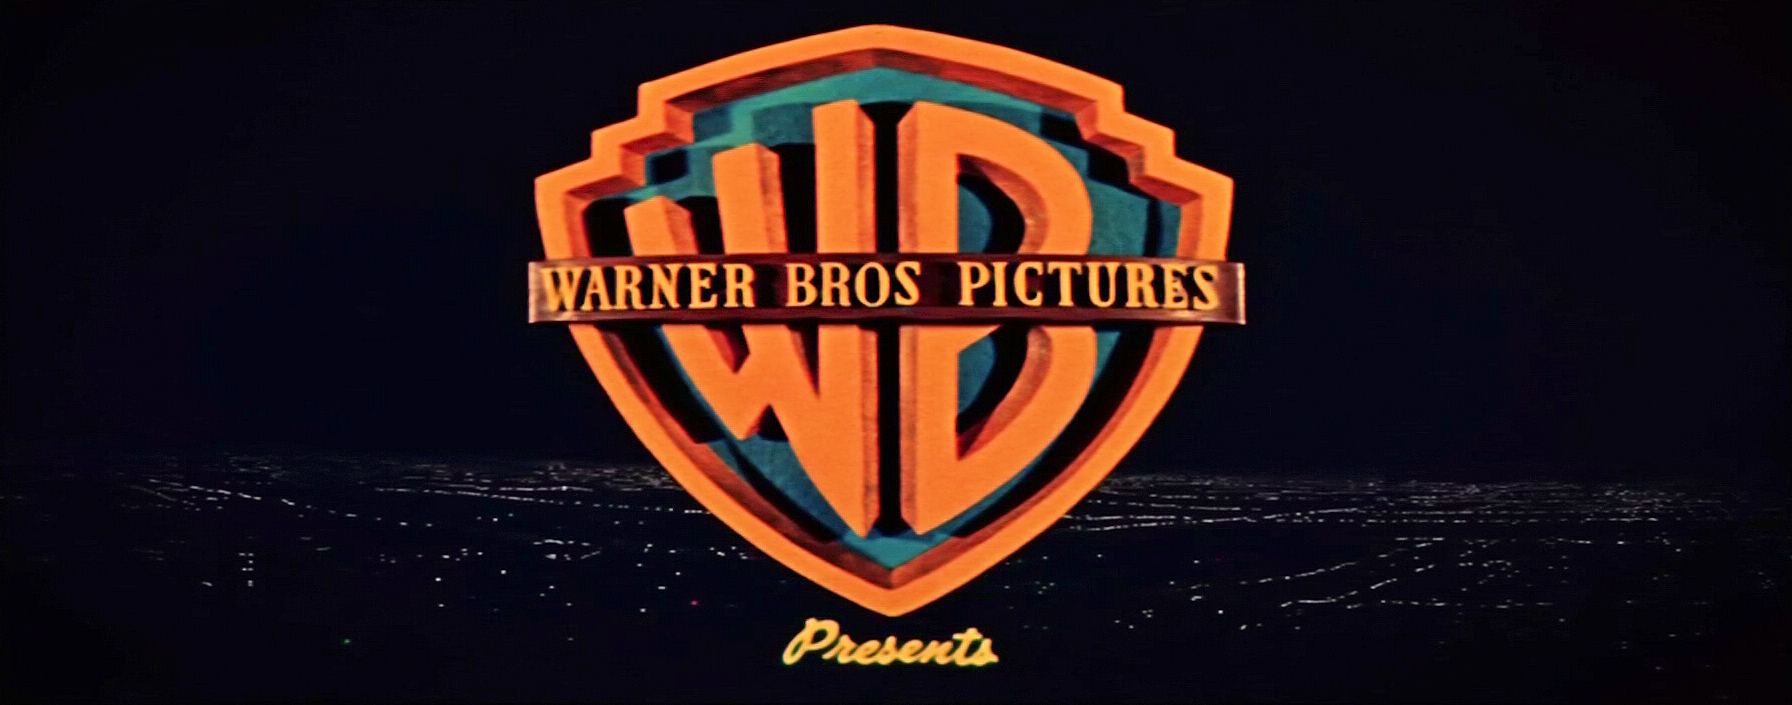 Main title from A Star Is Born (1954) (1). Warner Bros pictures presents